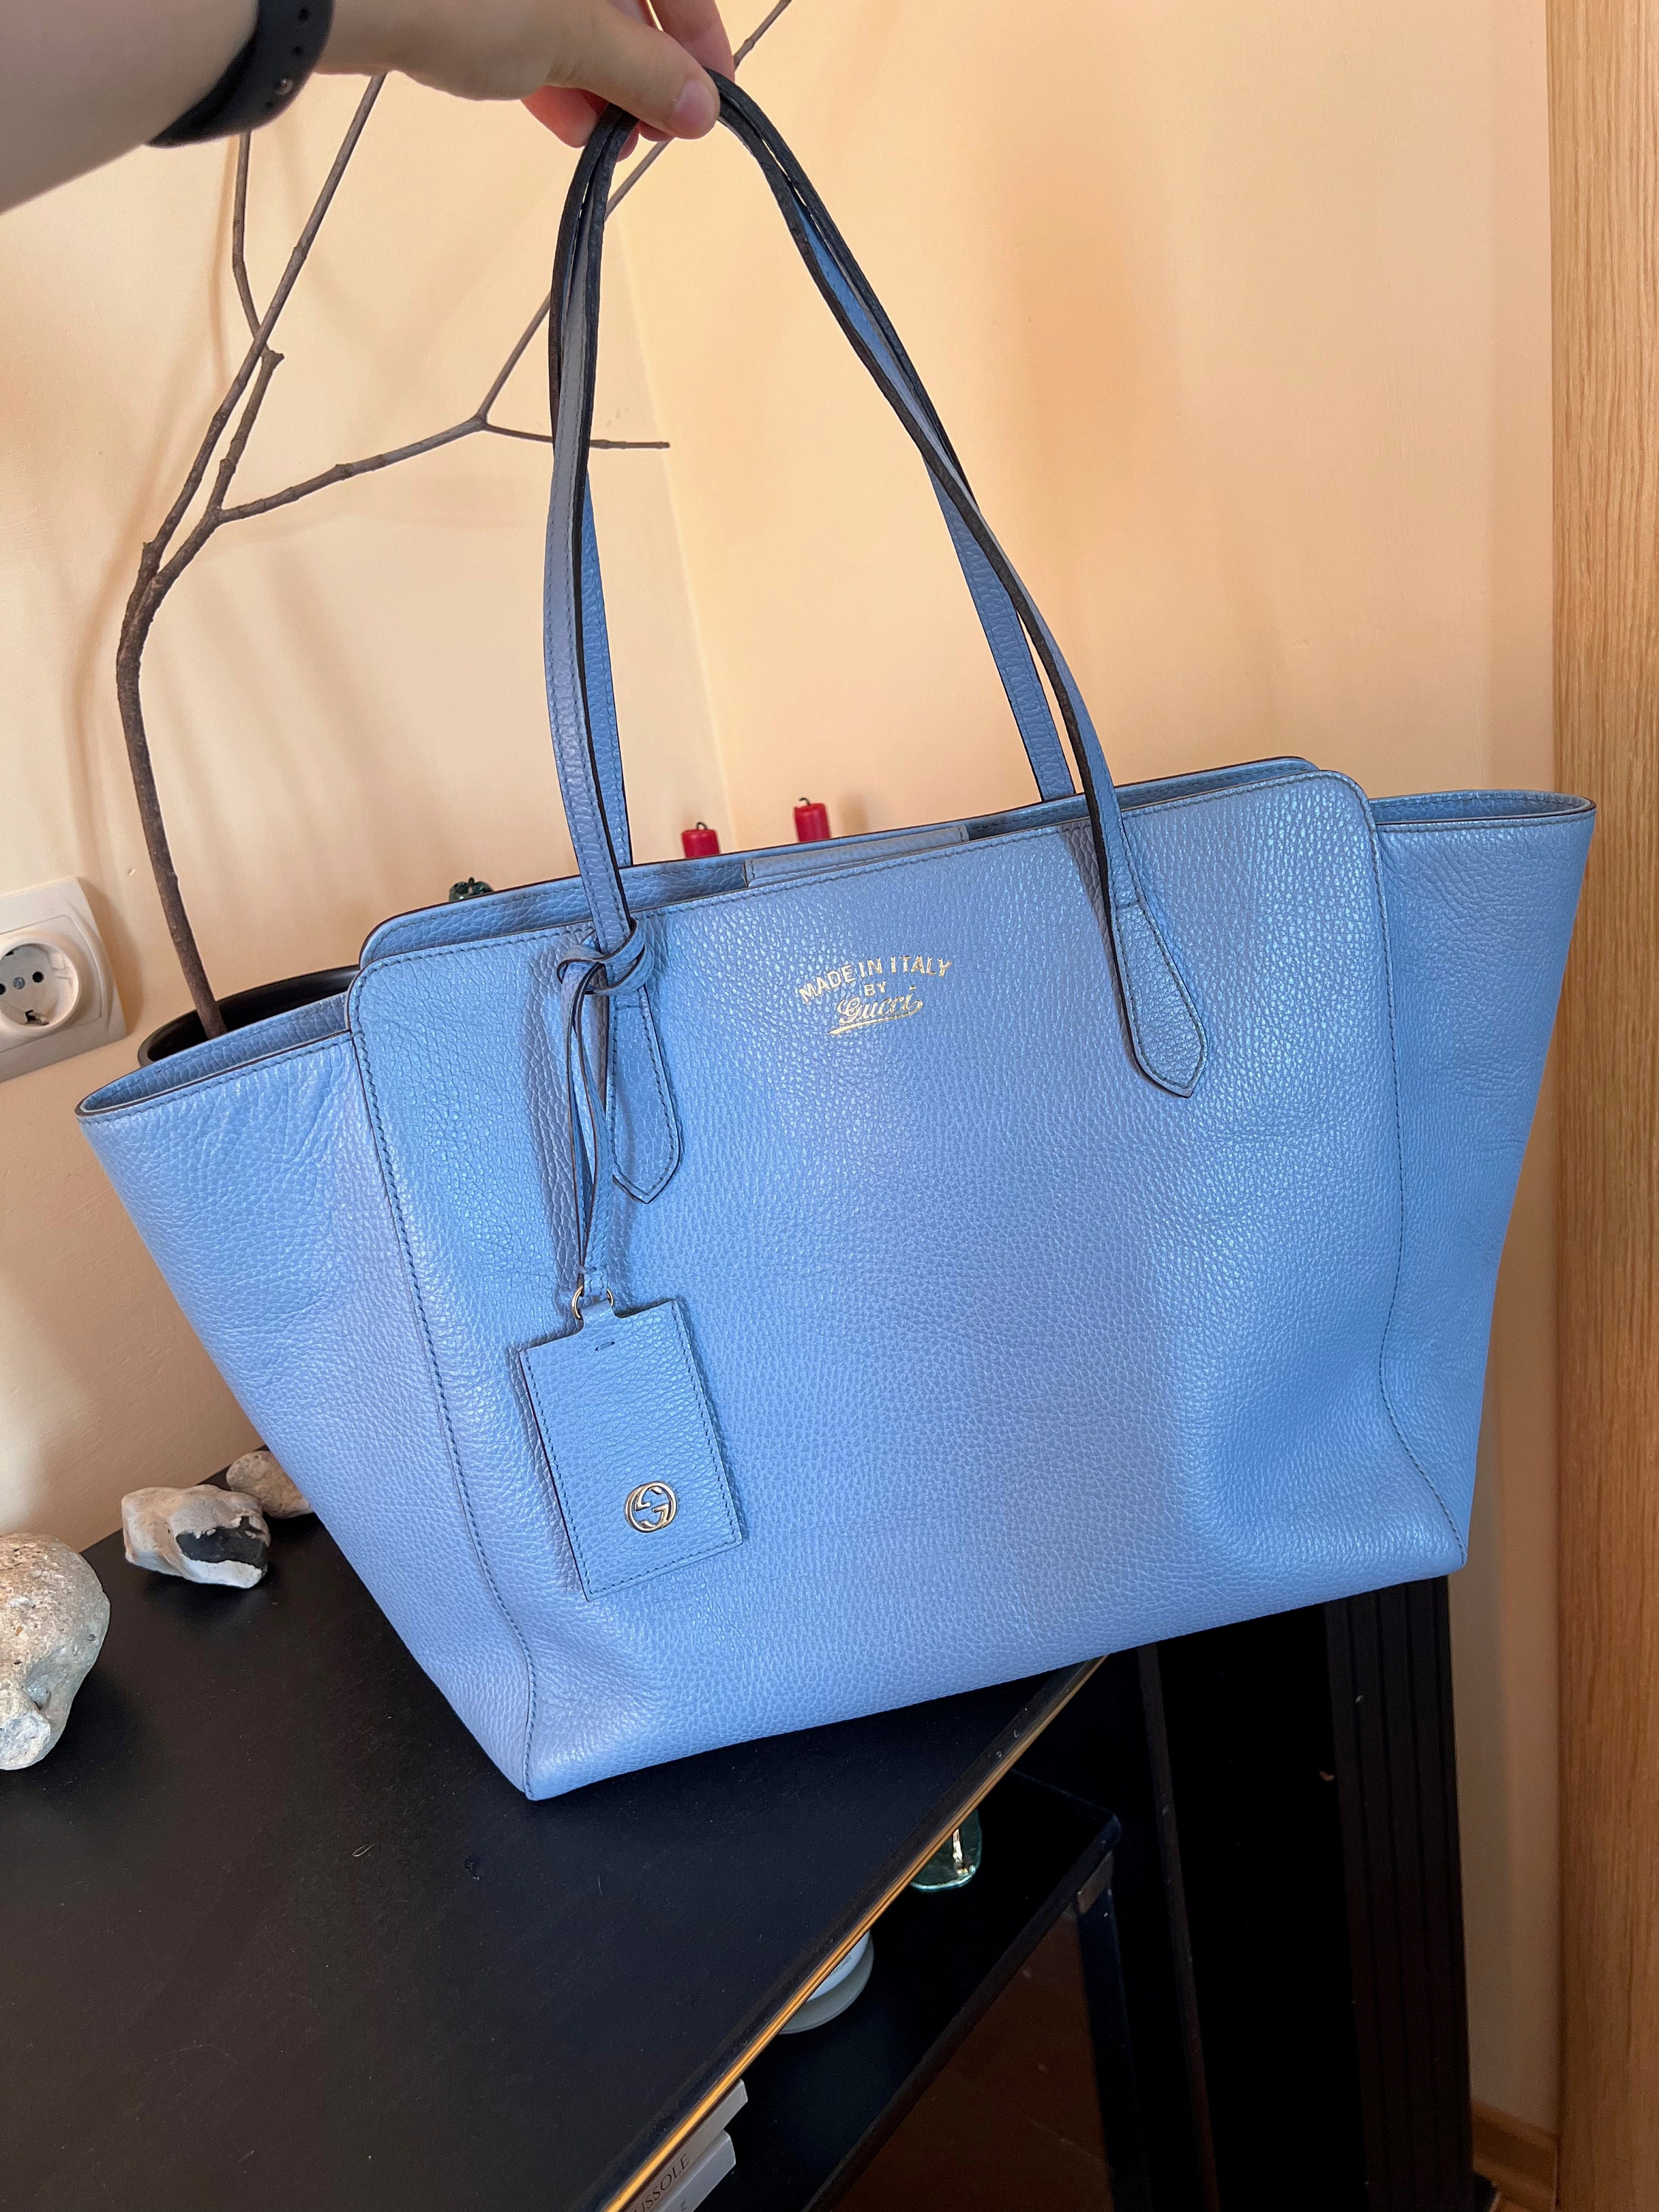 Louis Feraud - Authenticated Handbag - Leather Blue for Women, Very Good Condition